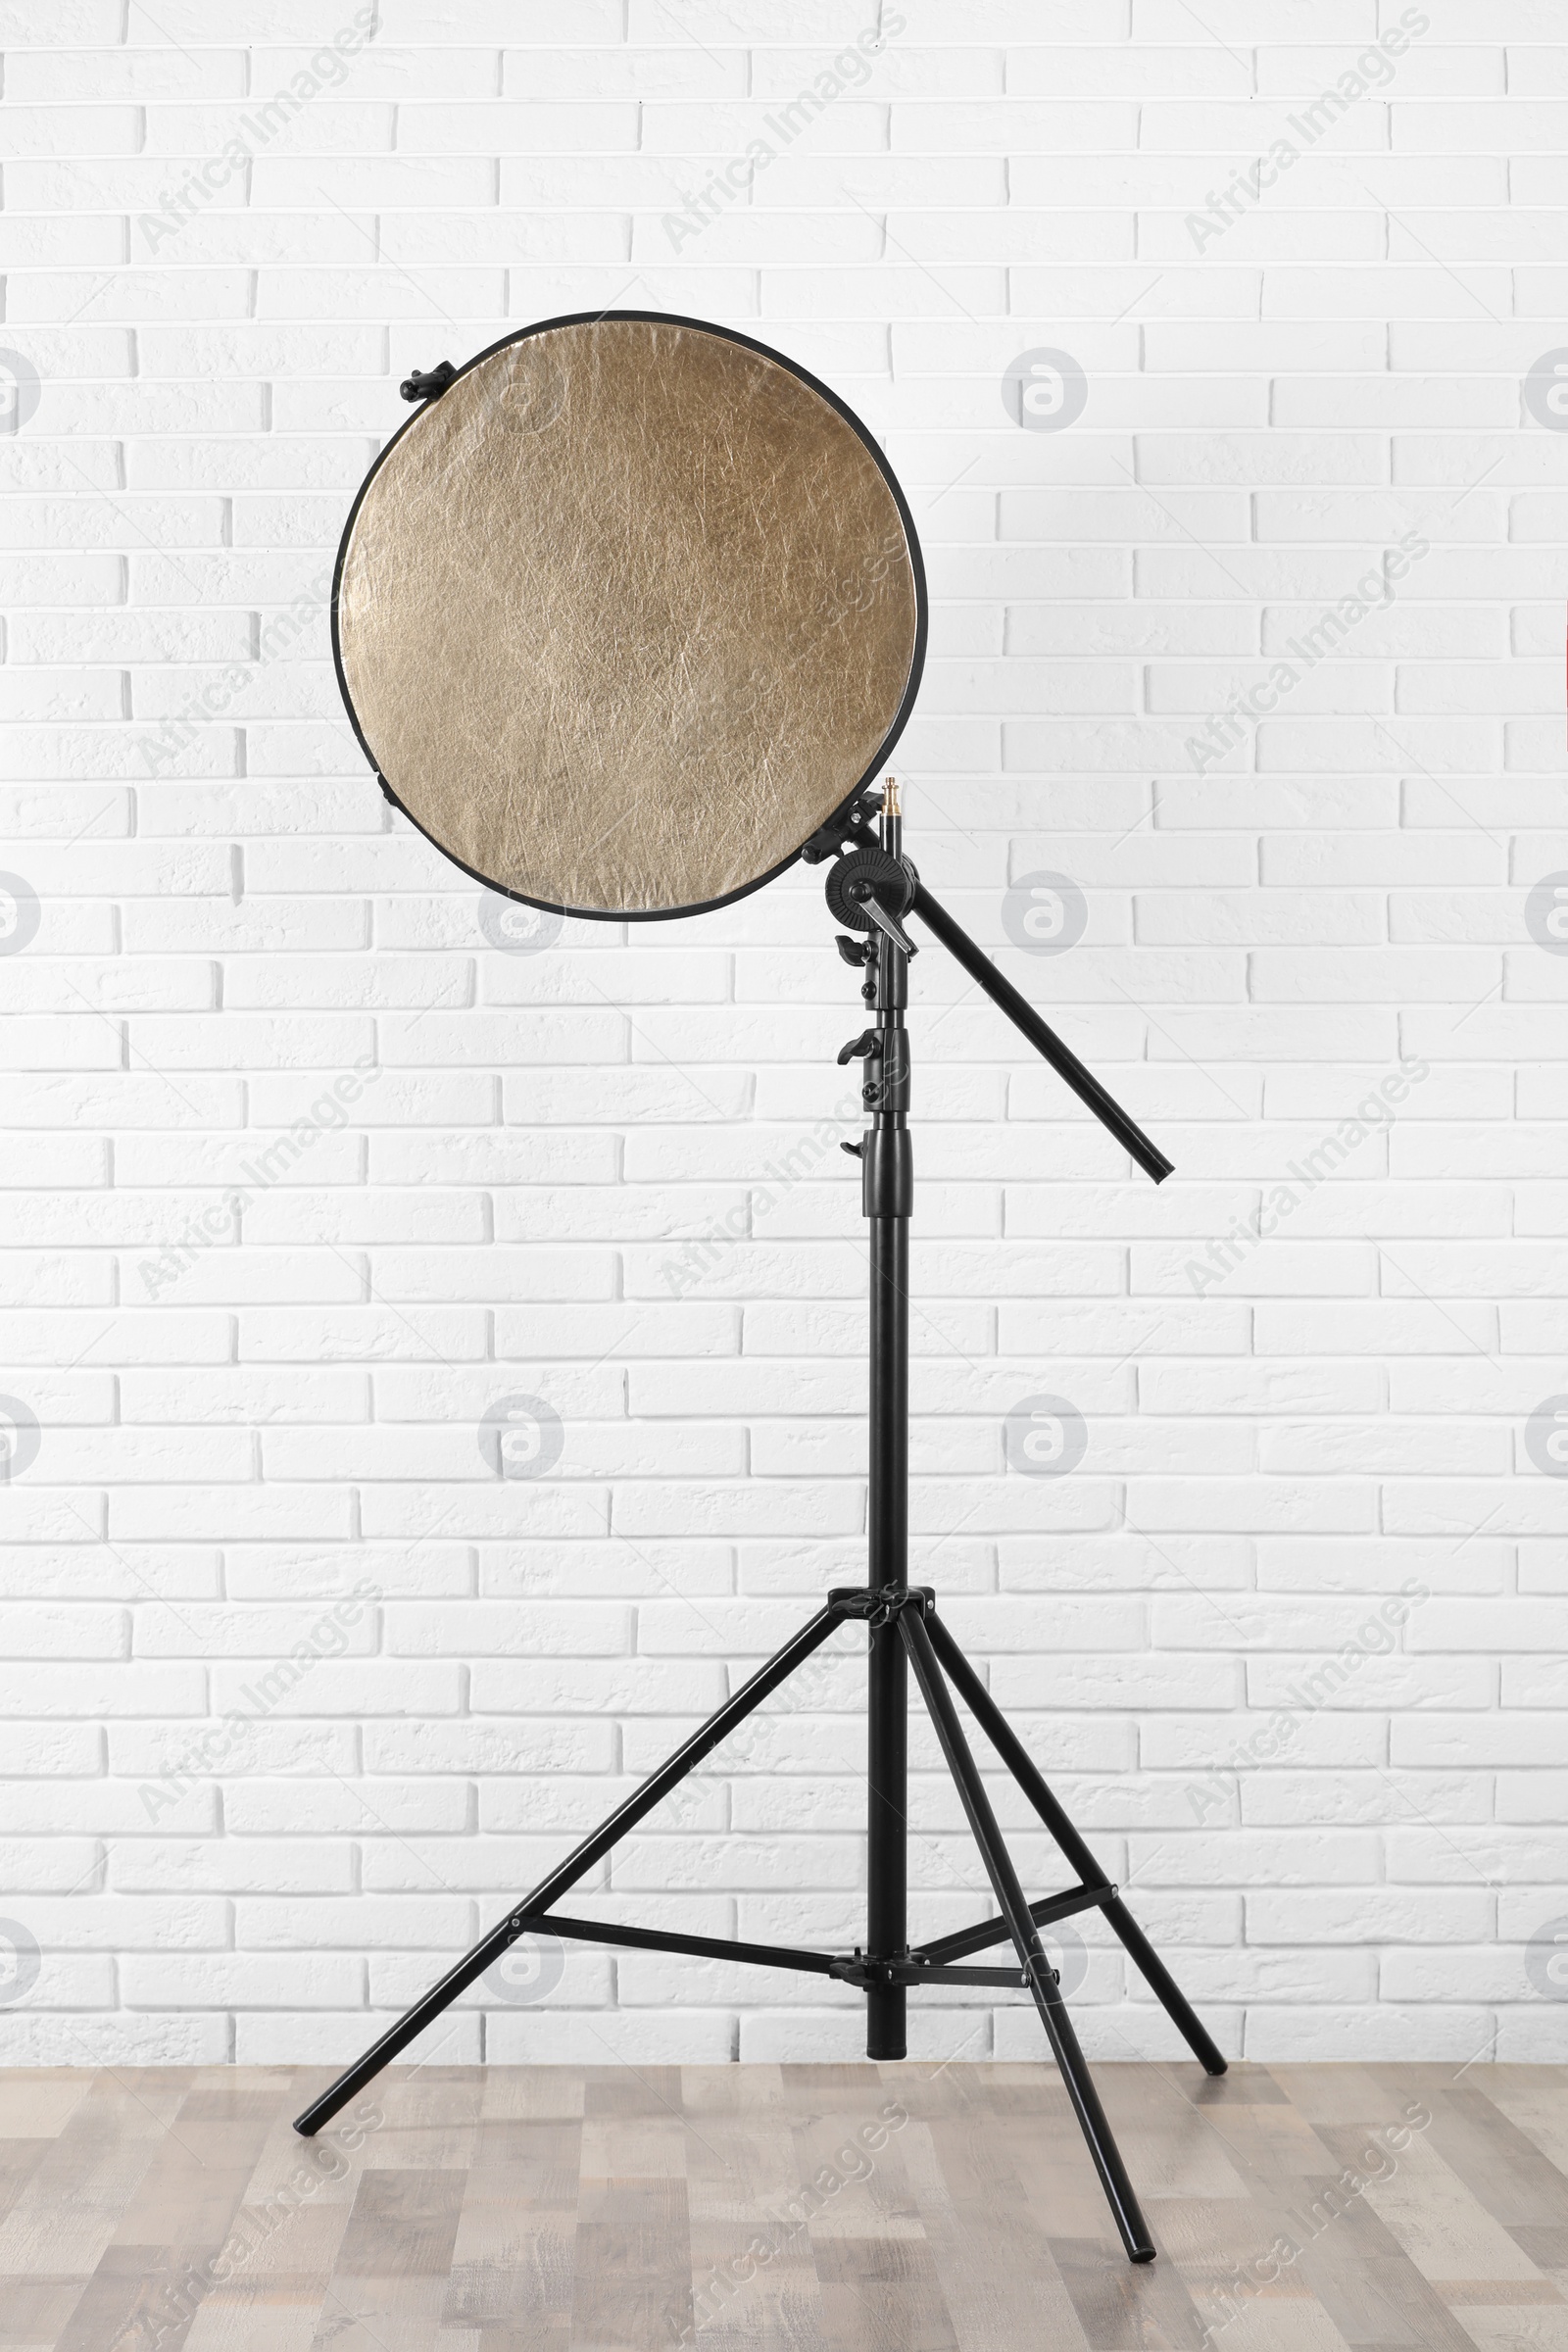 Photo of Professional golden reflector on tripod near white brick wall in room. Photography equipment